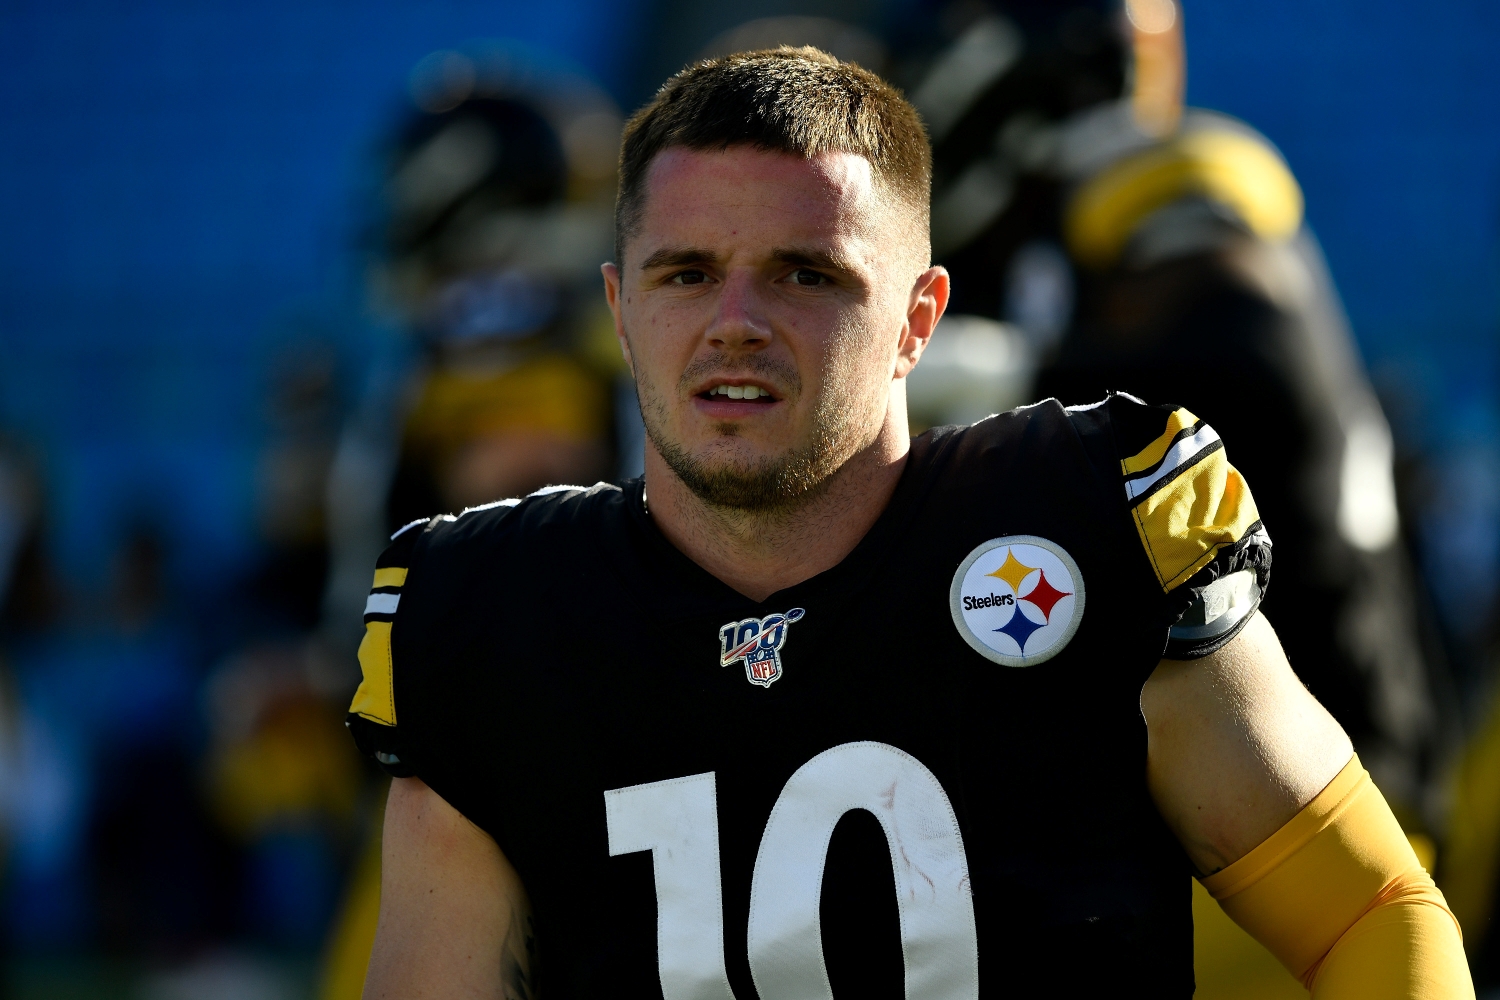 Ryan Switzer went from playing for the Pittsburgh Steelers to suiting up for the rival Cleveland Browns.